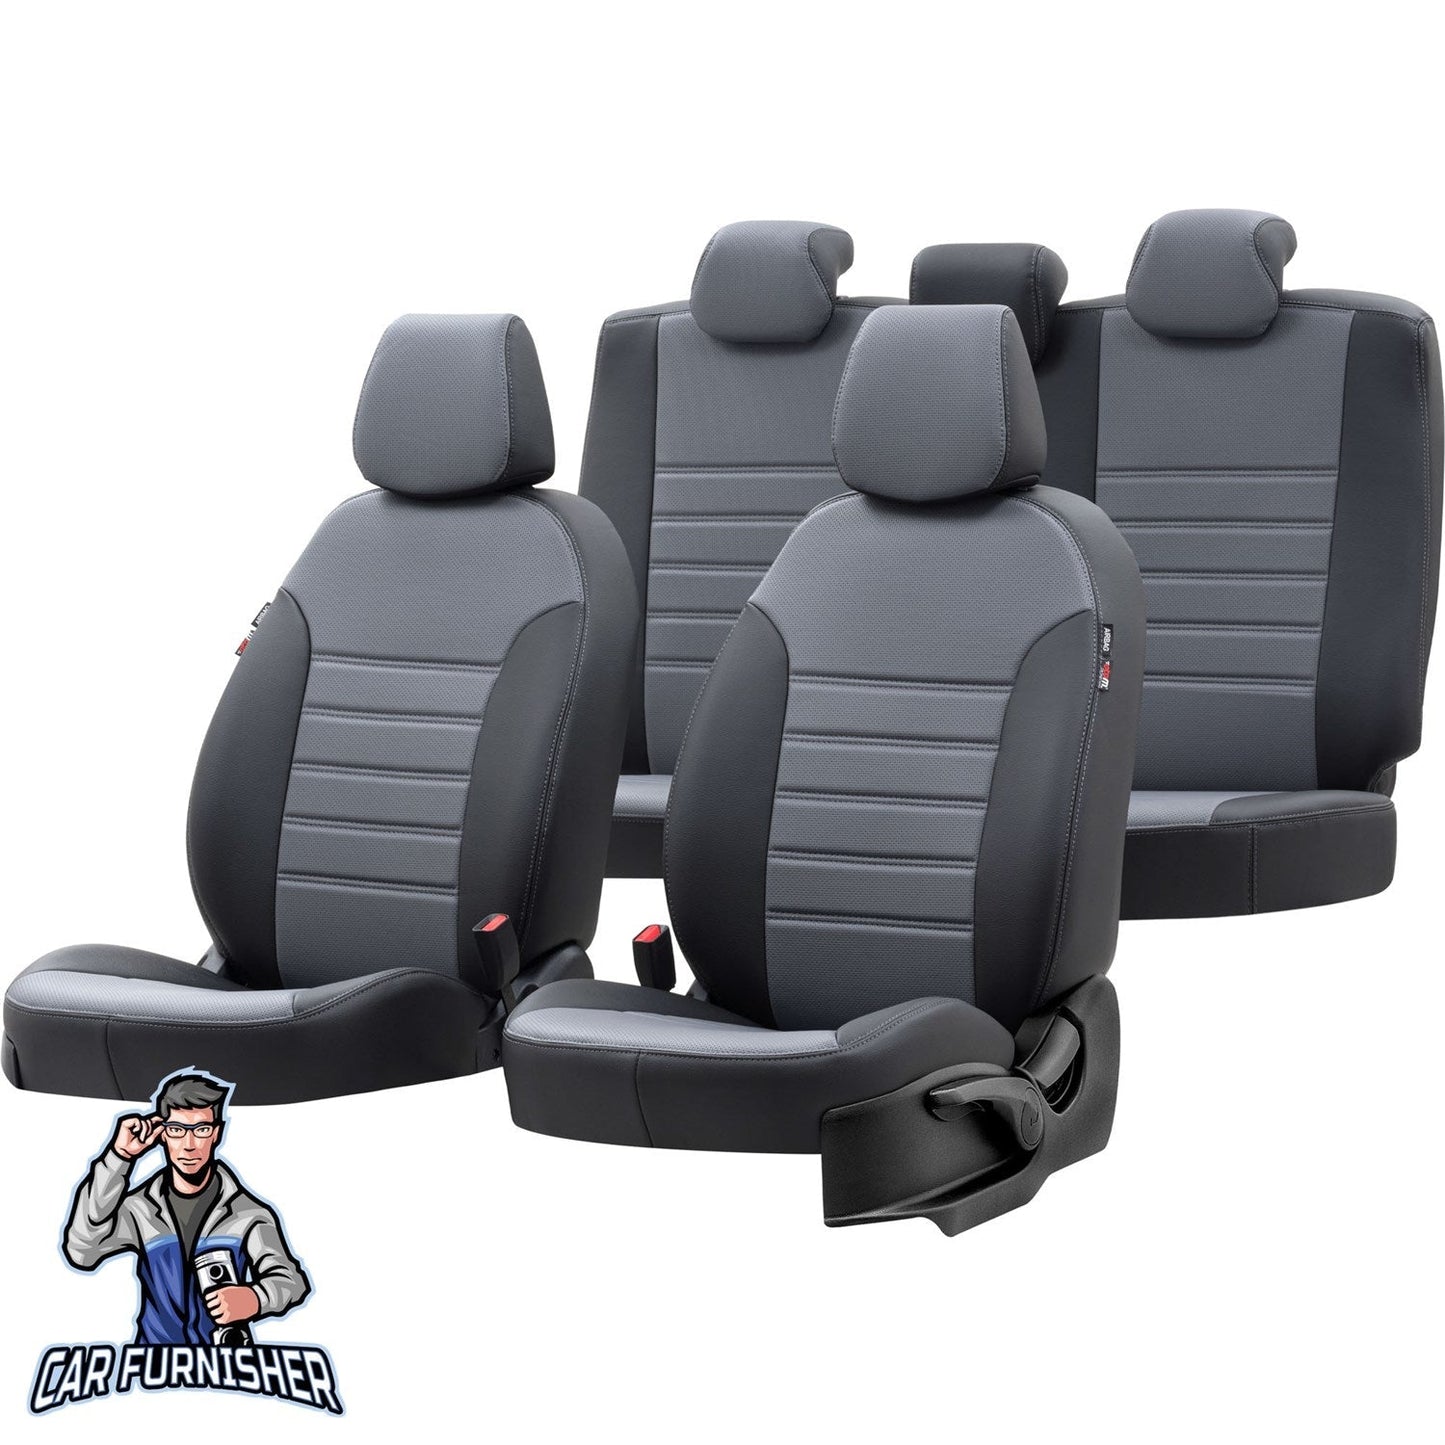 Skoda Roomstar Seat Cover New York Leather Design Smoked Black Leather